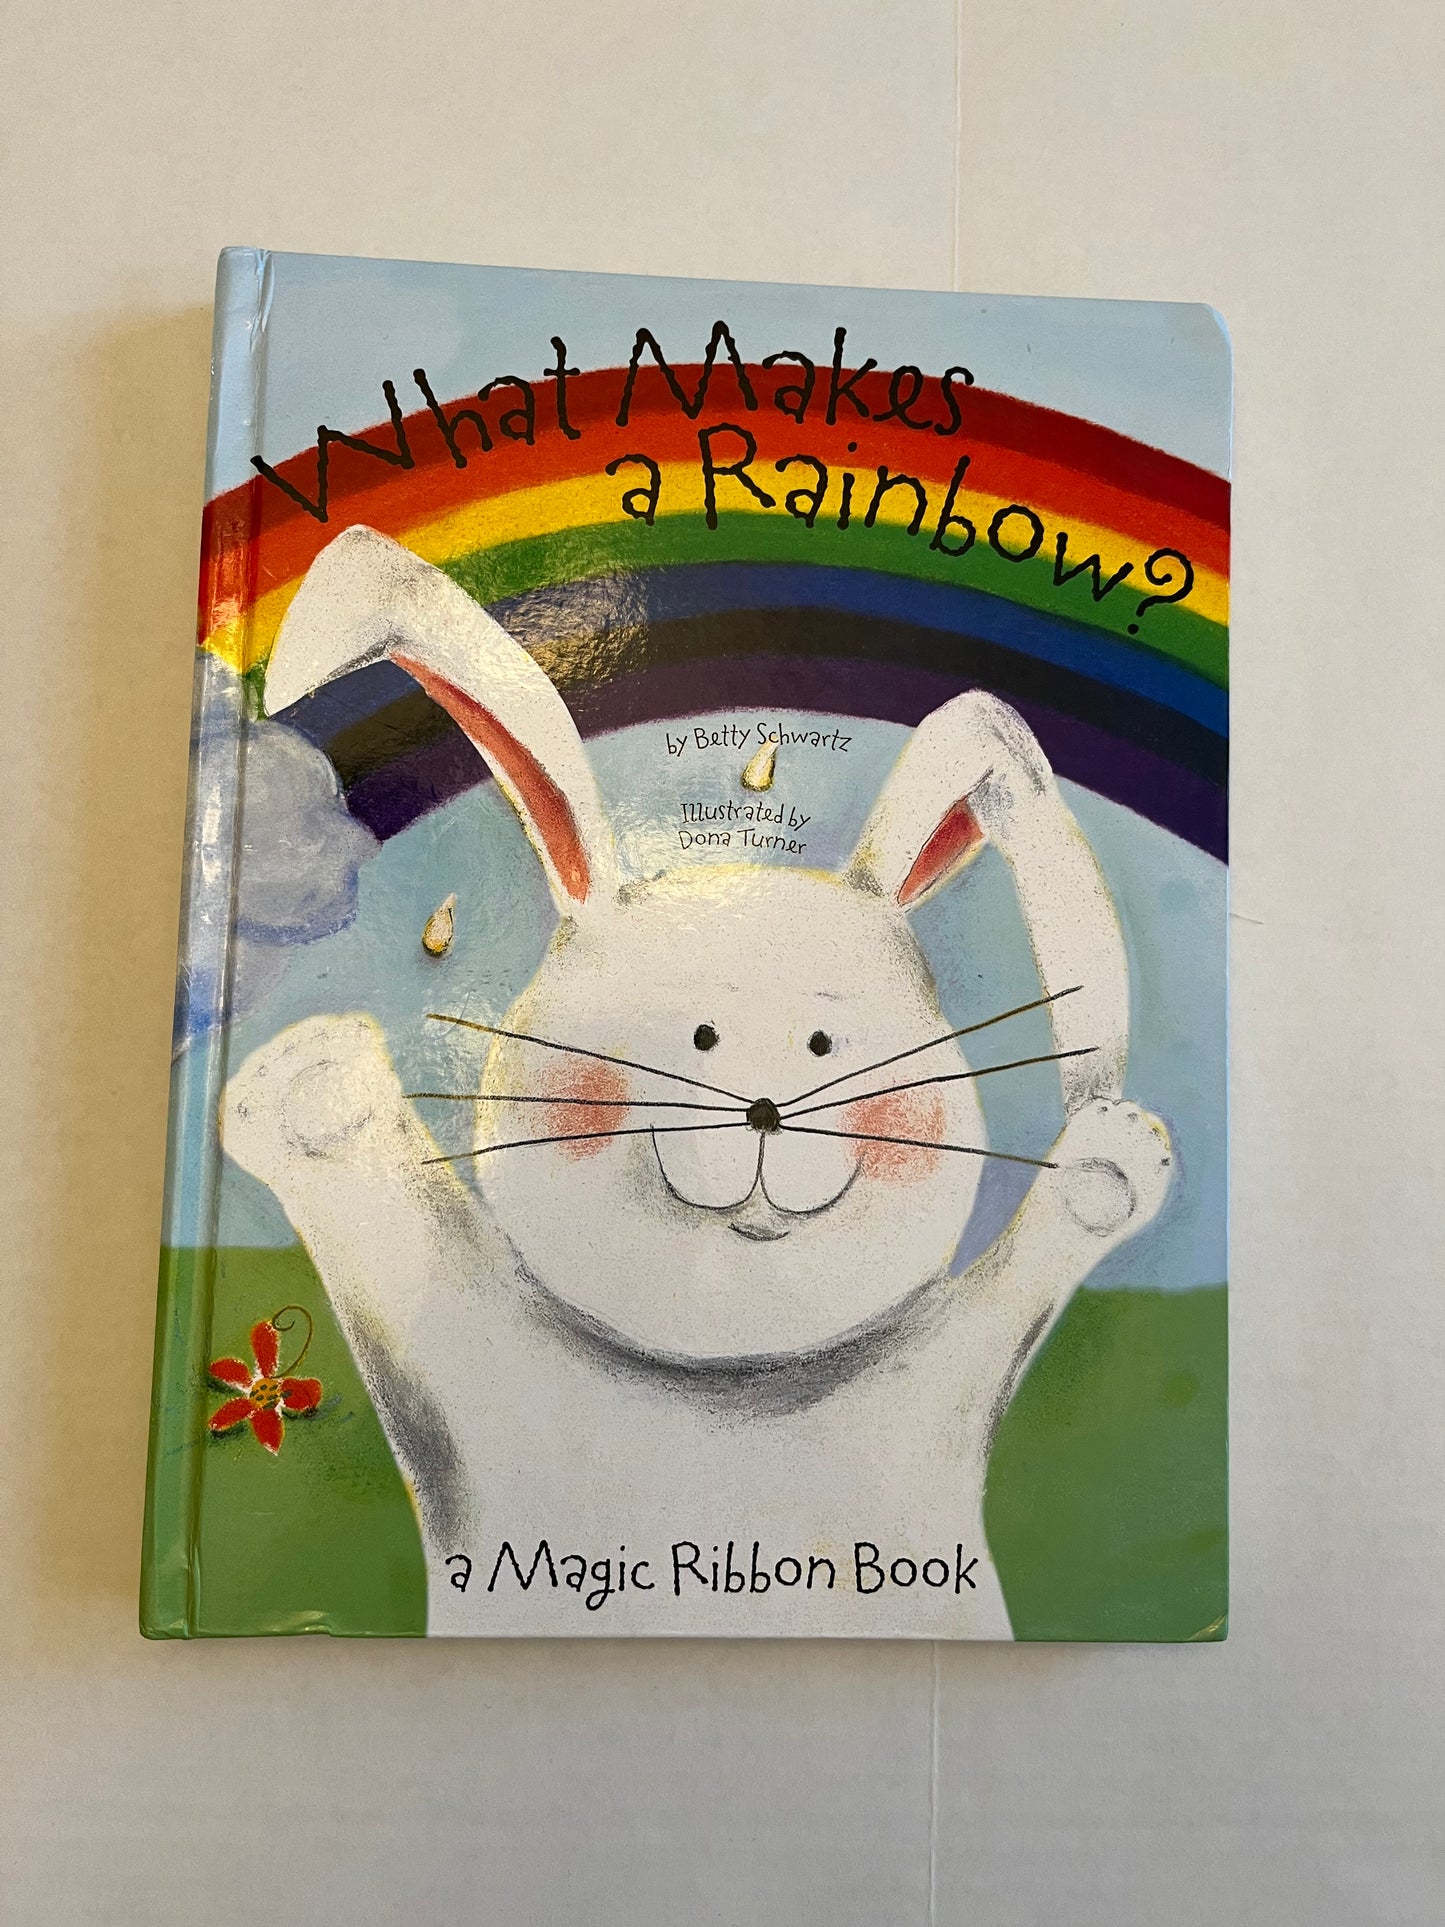 What makes a rainbow book. Ribbons appear when page is turned to make a rainbow. PPU Mariemont